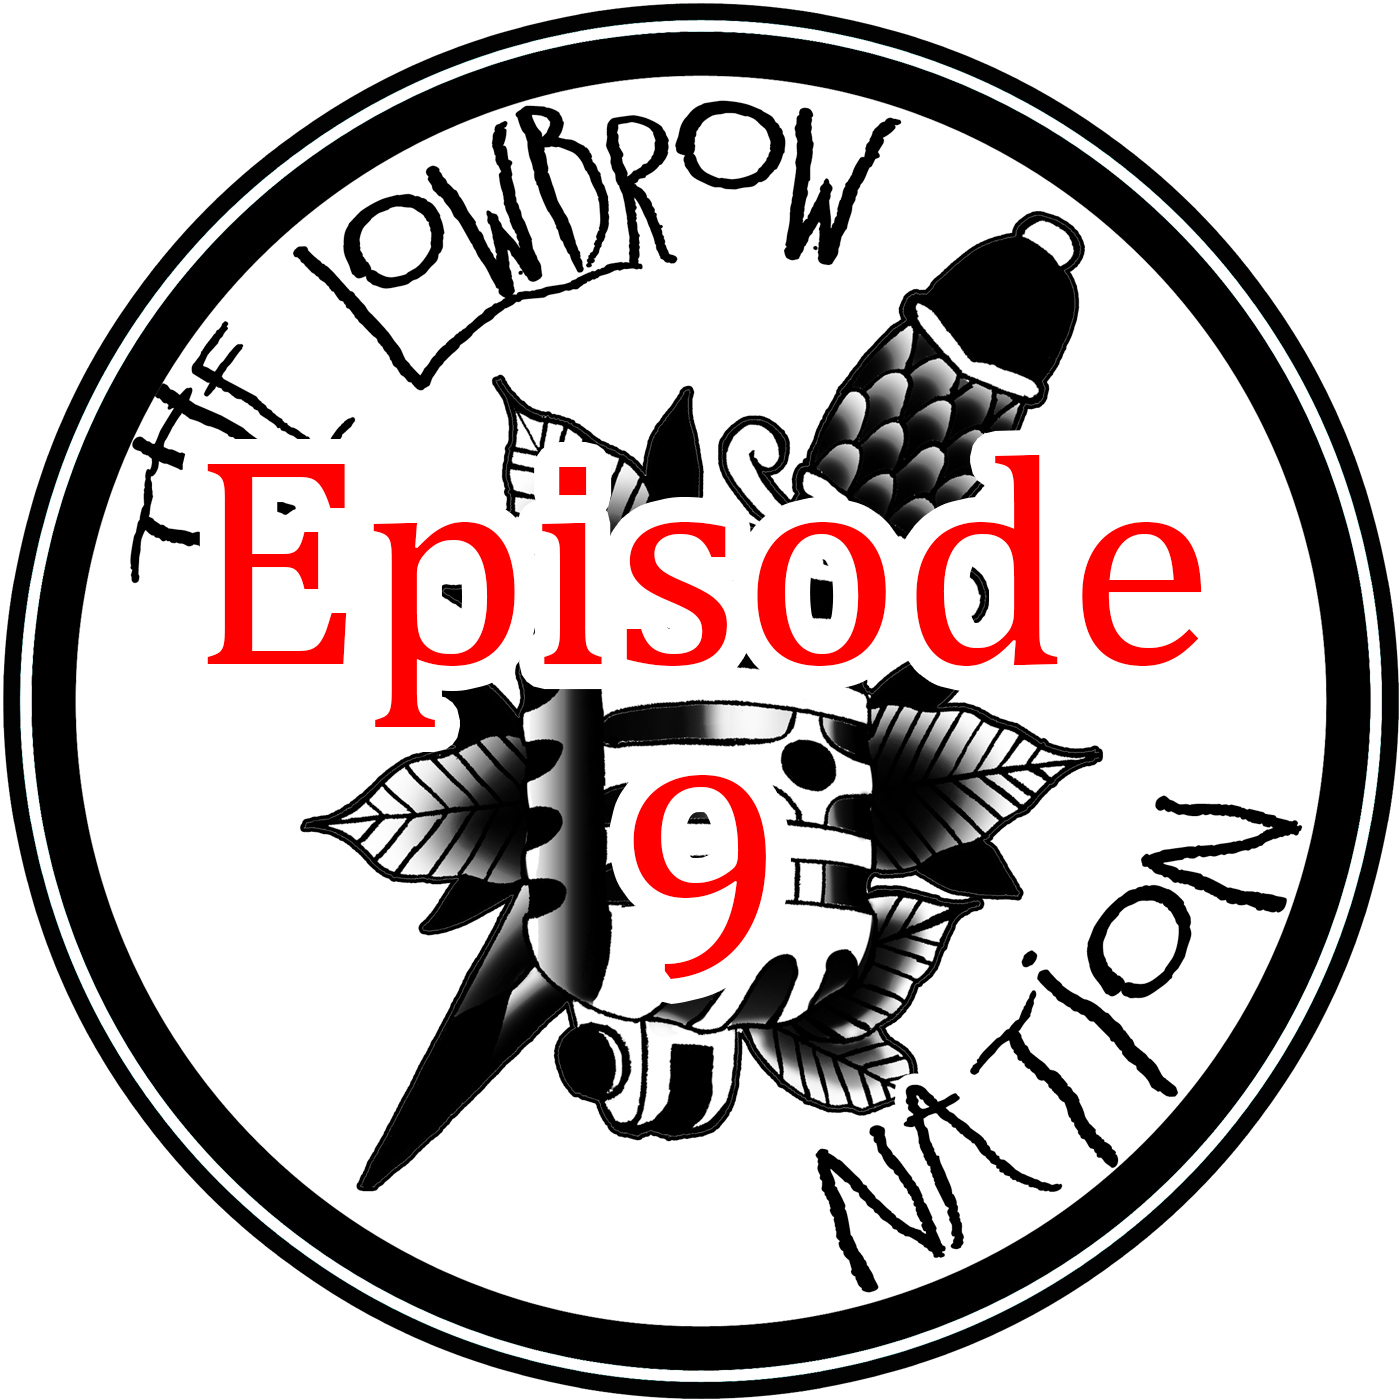 Ep 9 - A Lowbrow Late Night